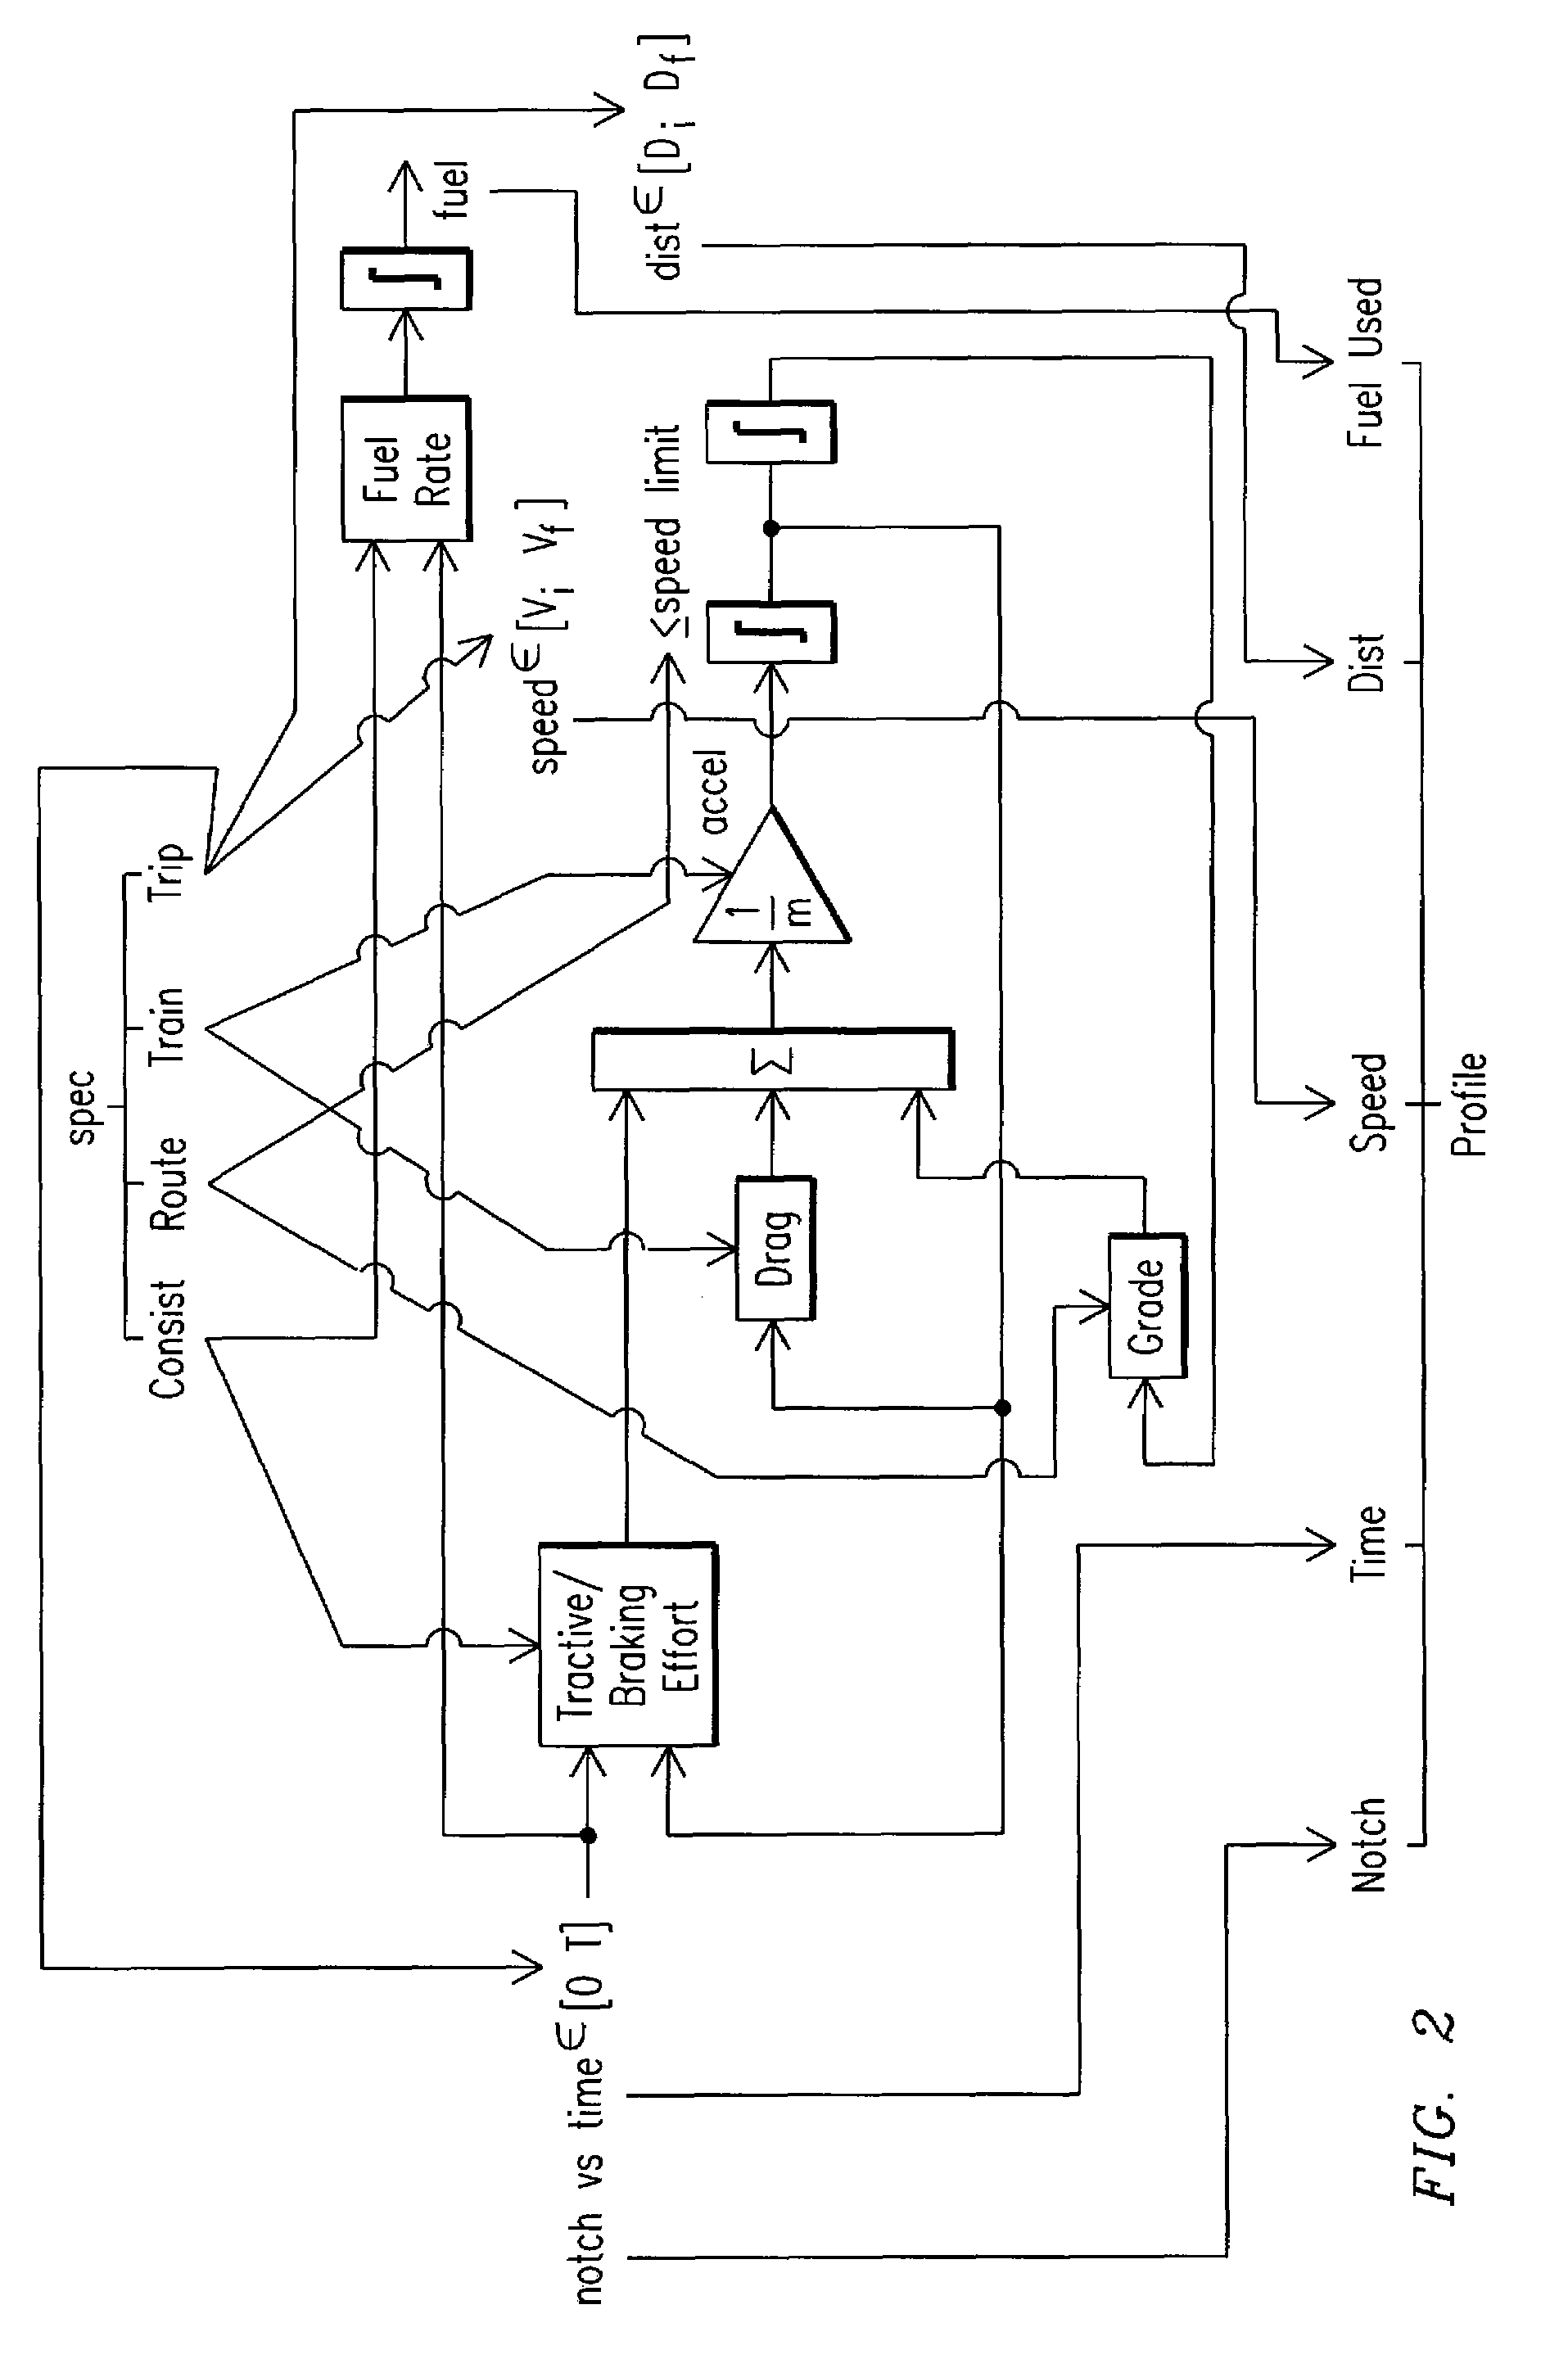 Trip Optimization System and Method for a Vehicle